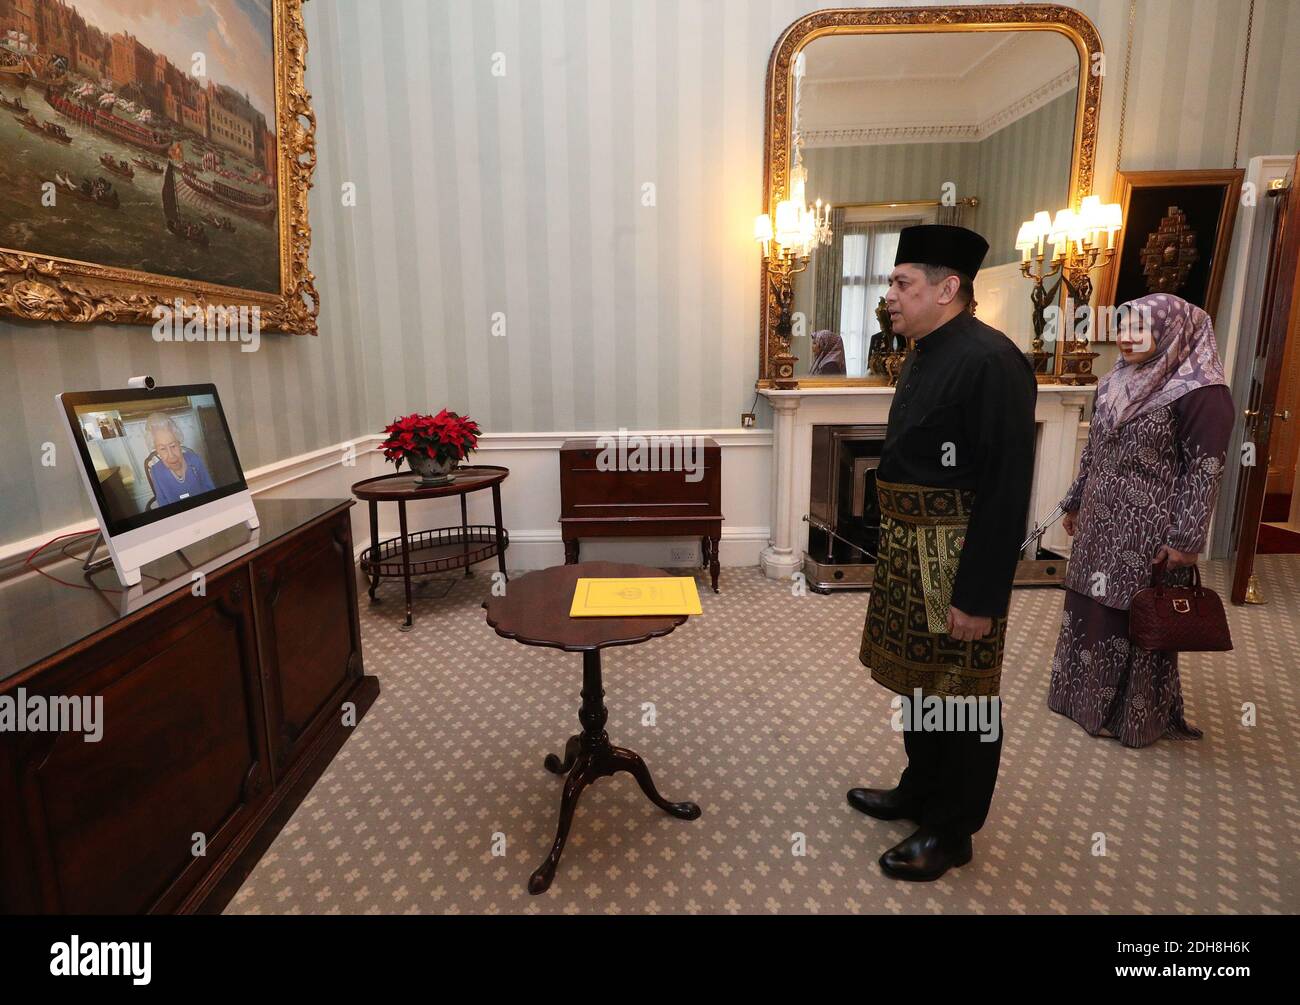 Queen Elizabeth II appears on a screen by videolink from Windsor Castle, where she is in residence, during a virtual audience to receive His Excellency the High Commissioner for Brunei Darussalam First Admiral Pengiran Dato Seri Pahlawan Norazmi bin Pengiran Haji Muhammad and his wife, Pg Datin Noralam binti Pg Hj Kahar, who were at London's Buckingham Palace. Stock Photo